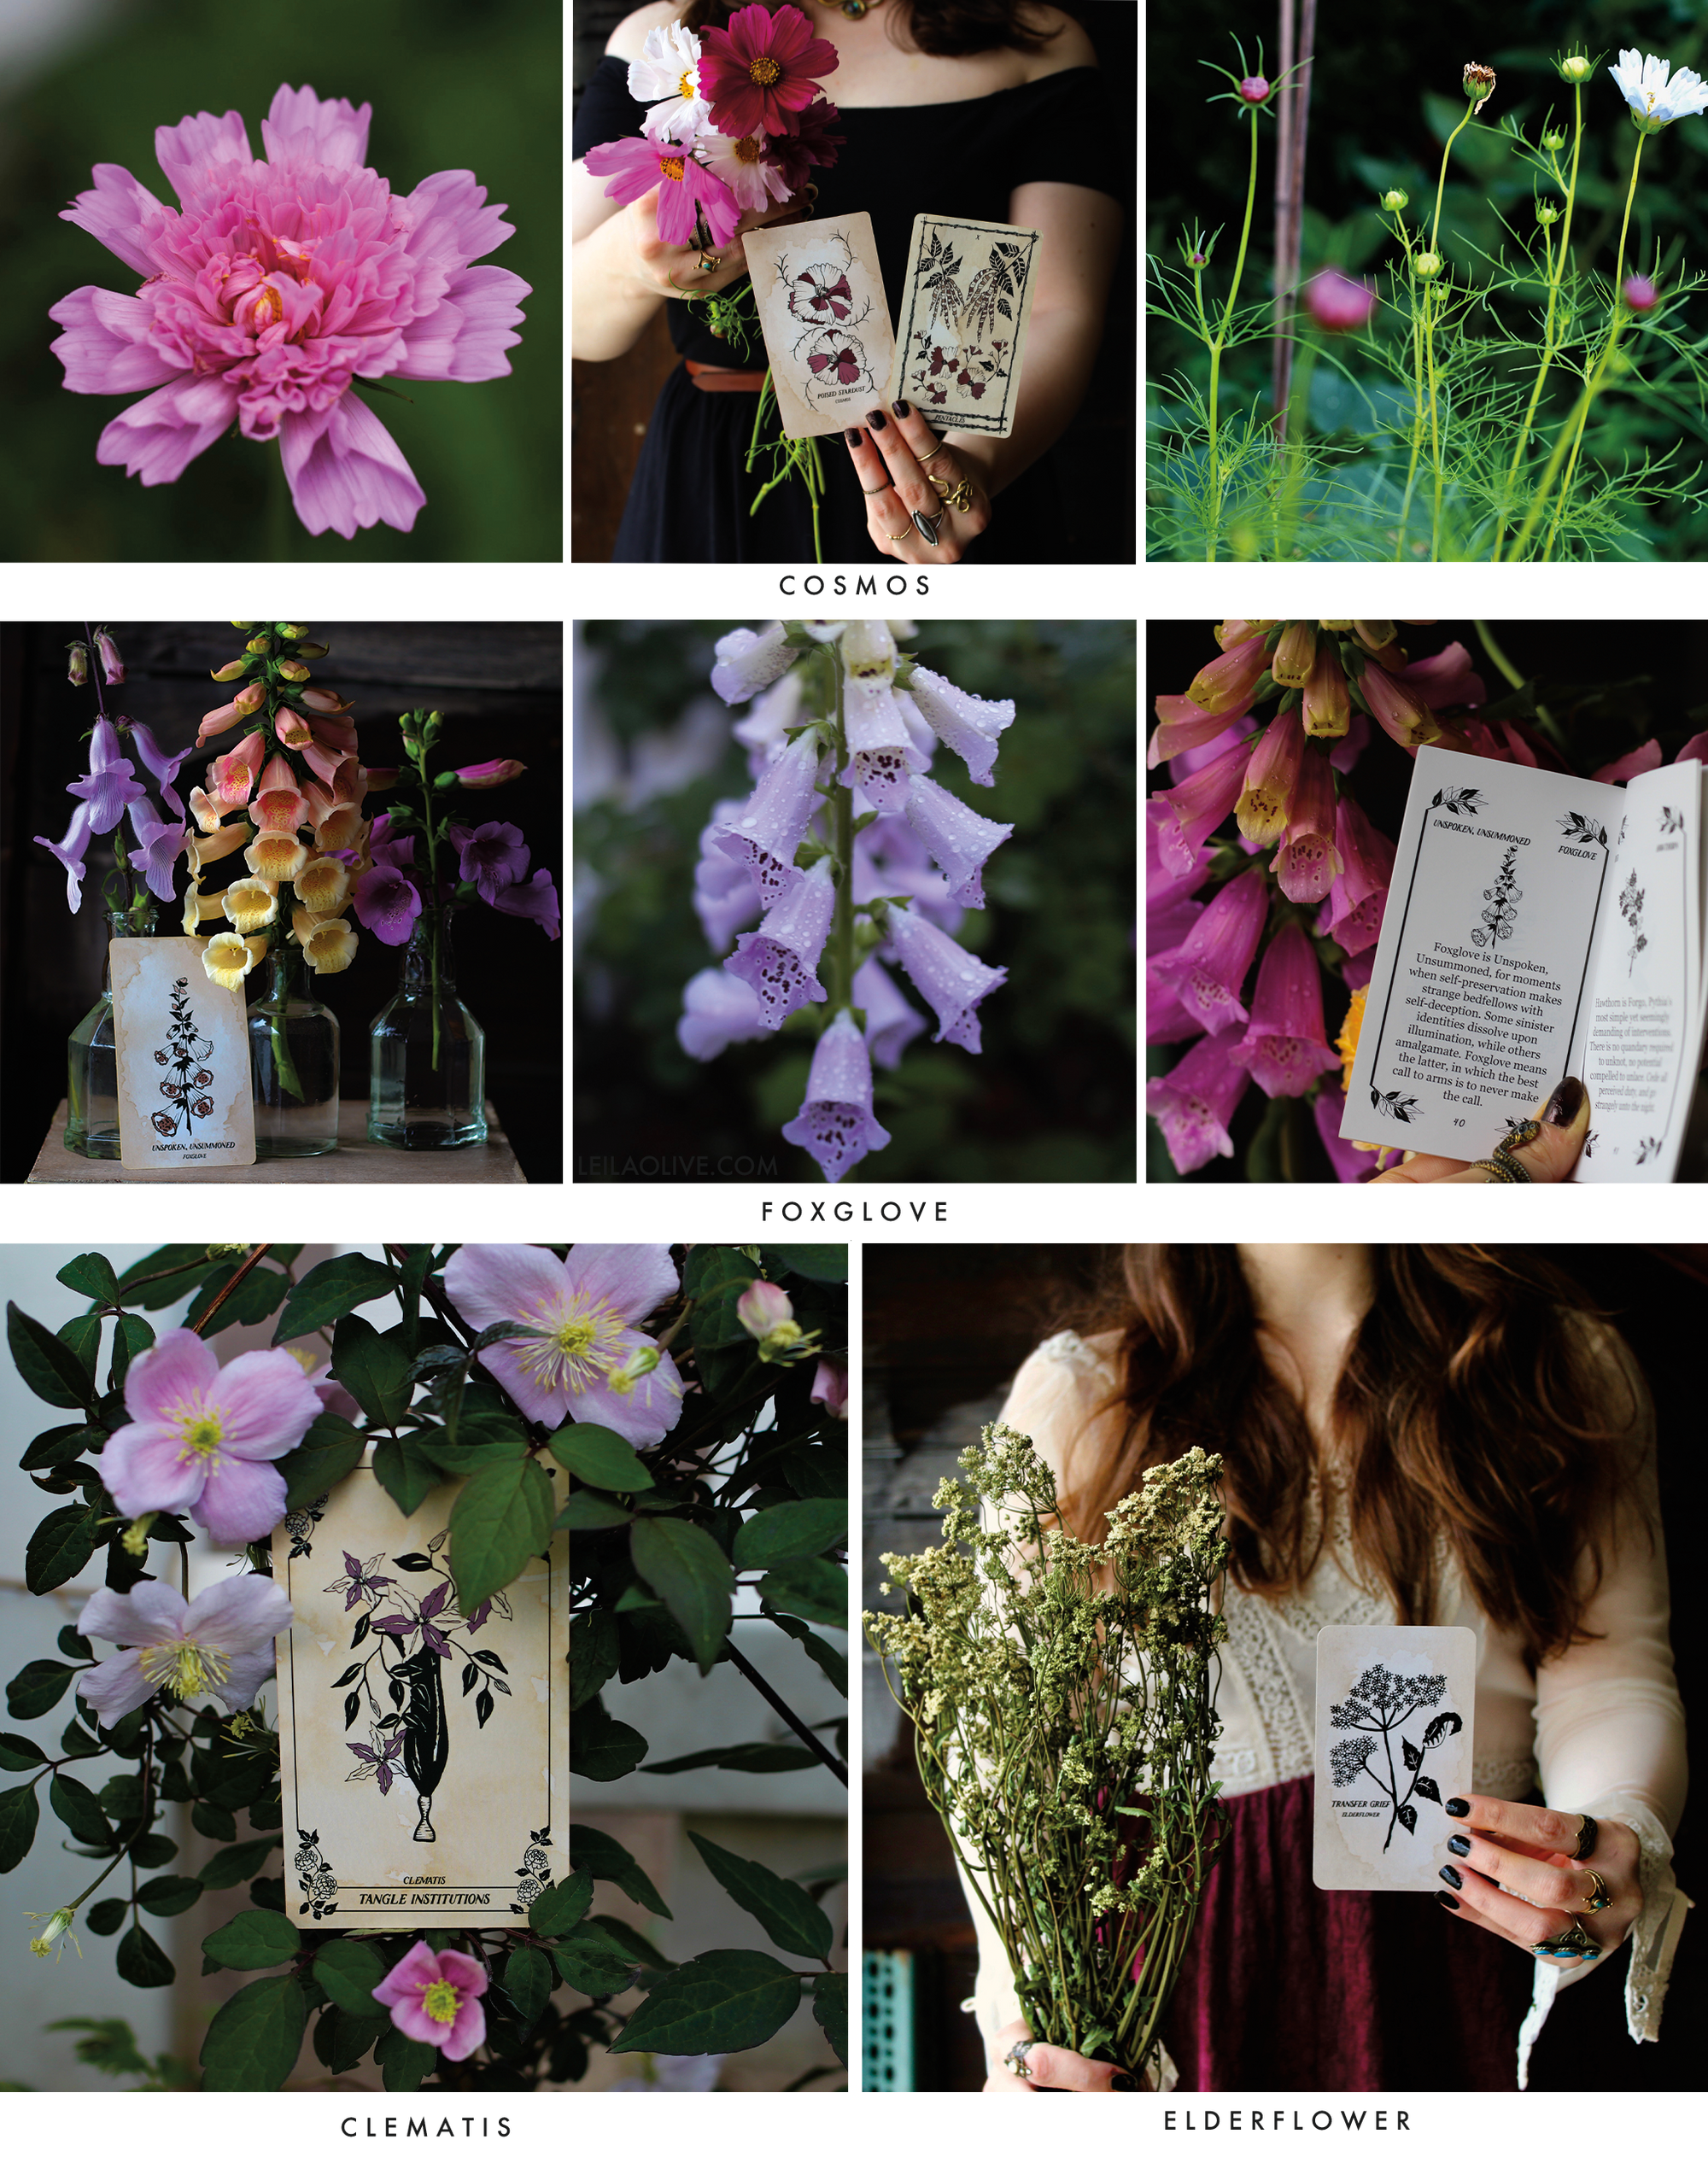 Botanical Oracle and Tarot card decks, illustrated by hand and rooted in mythology, traditional Tarot interpretations, florals and the plant kingdom. 